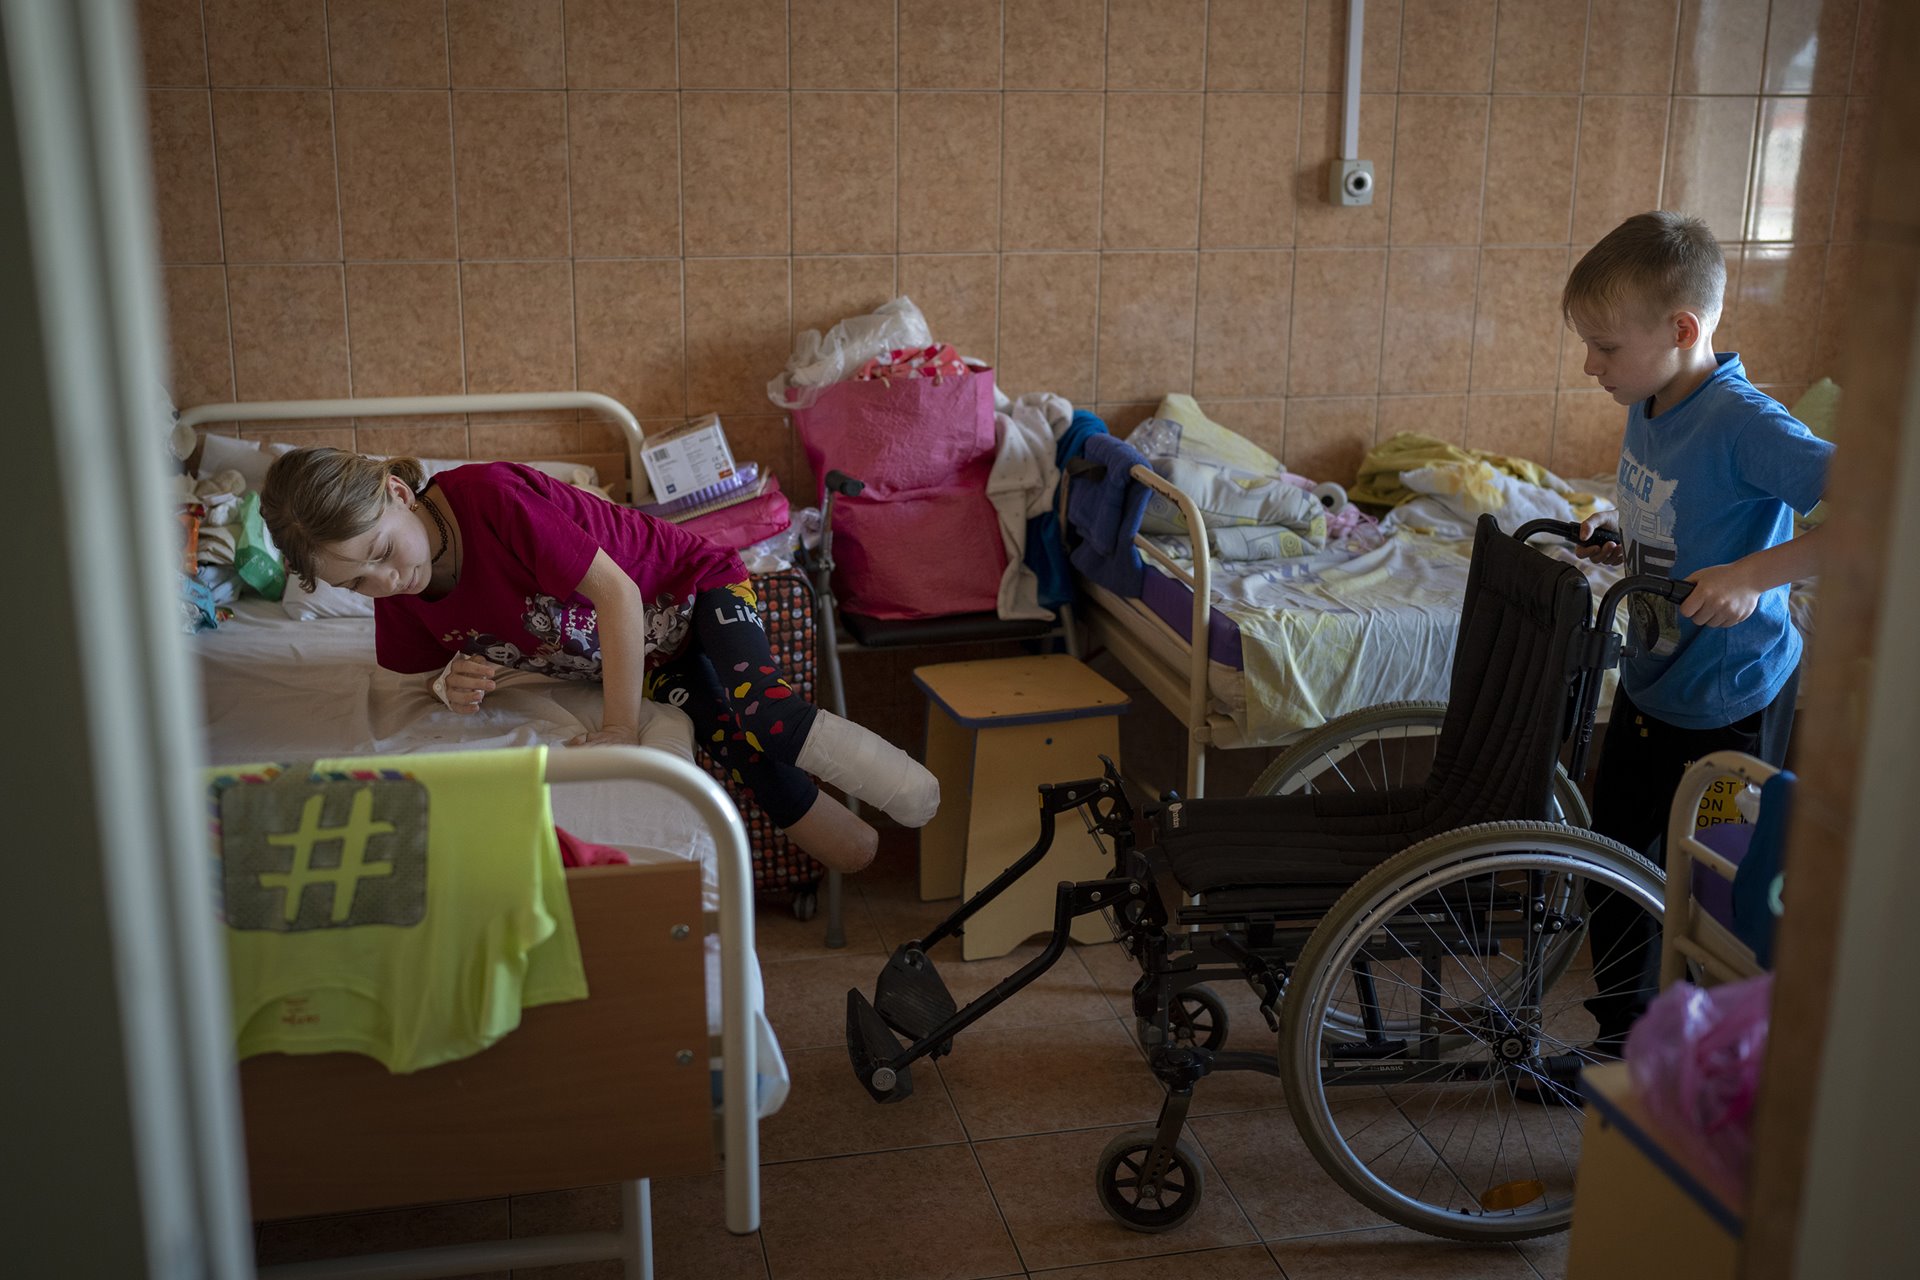 Yarik Stepanenko (11) helps his twin sister Yana, at a public hospital in Lviv, Ukraine. Yarik and Yana, together with their mother Natasha, were injured during shelling of a train station in the eastern city of Kramatorsk, on 8 April. According to the UN Human Rights Office, some 60 civilians were killed, and 110 wounded in a Russian missile strike on the station. Thousands of civilians were gathered there, awaiting evacuation. Russia denied involvement, claiming the strike was orchestrated by Ukraine. The family were later flown to San Diego, in the United States, where Yana and Natasha, who lost her left leg in the attack, received new prostheses, and Yarik underwent surgery.